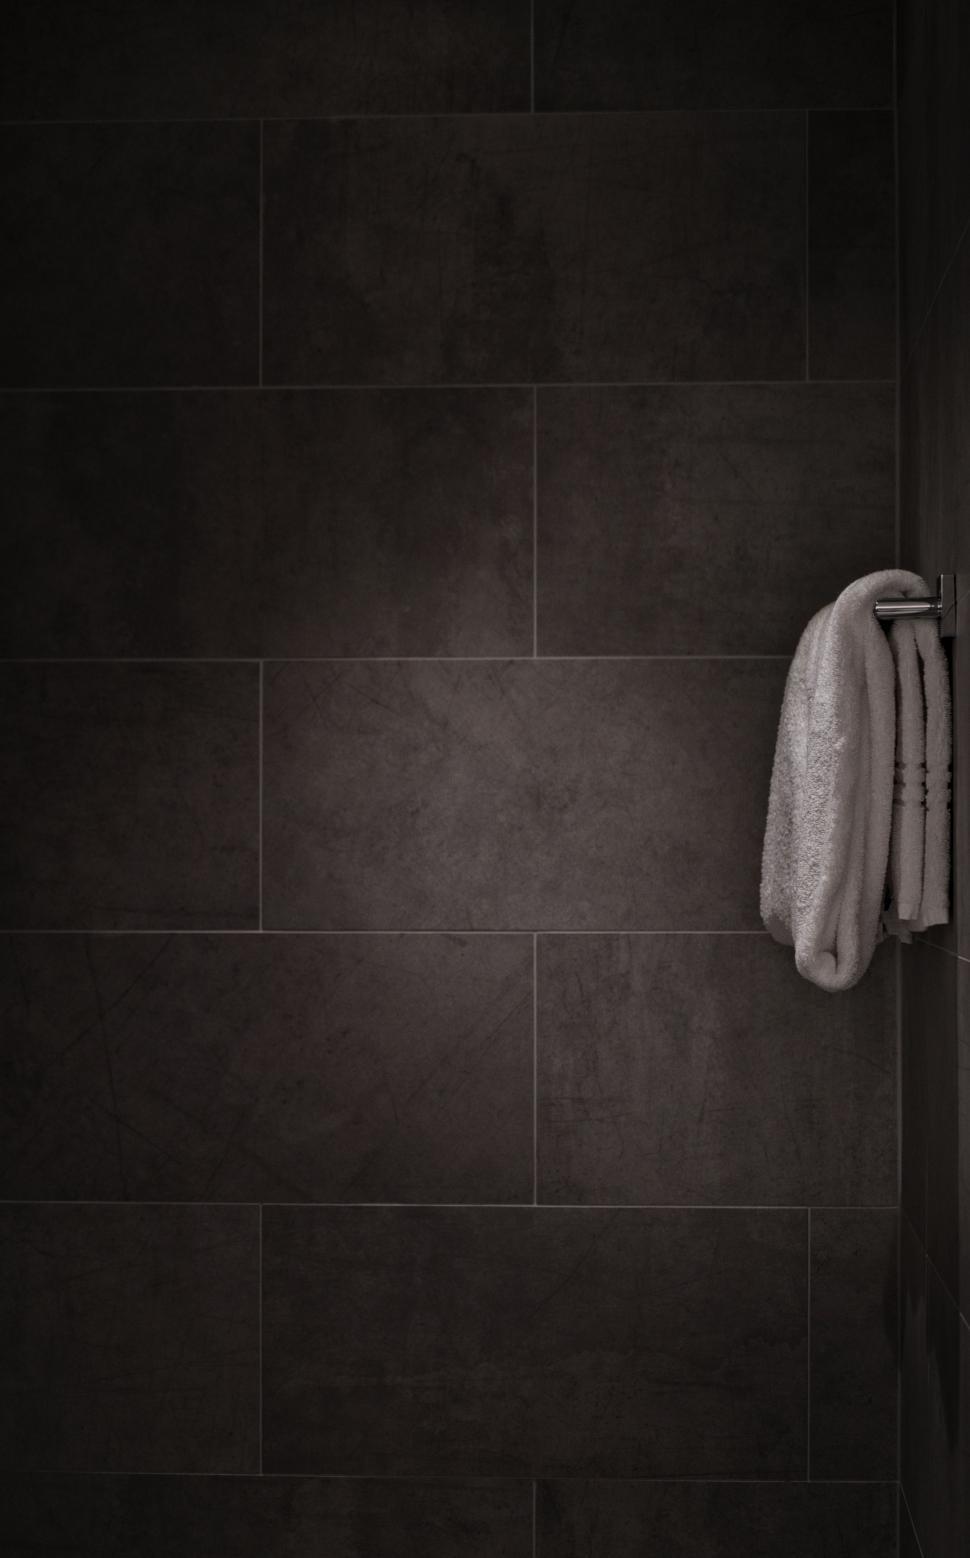 Free Image of A Towel Hanging on a Wall 